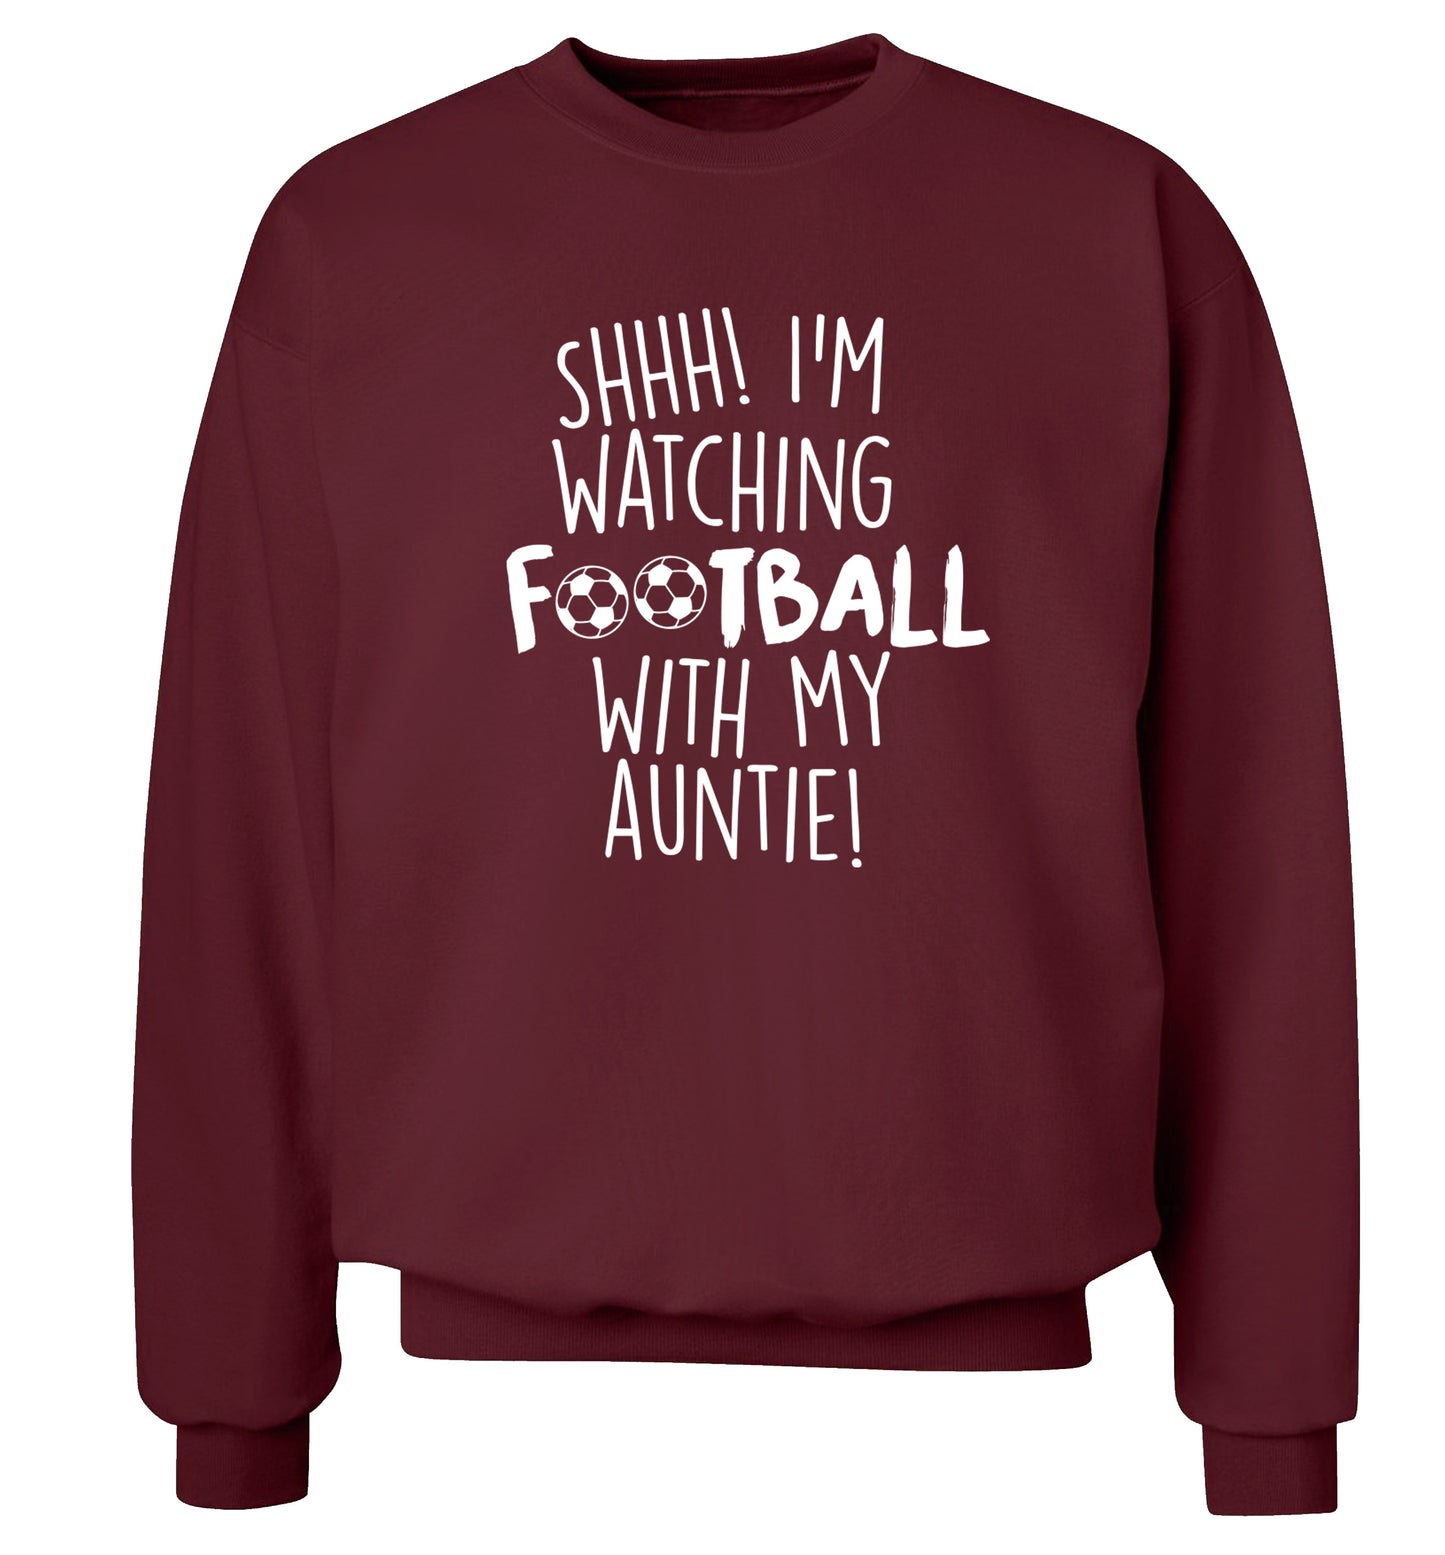 Shhh I'm watching football with my auntie Adult's unisexmaroon Sweater 2XL